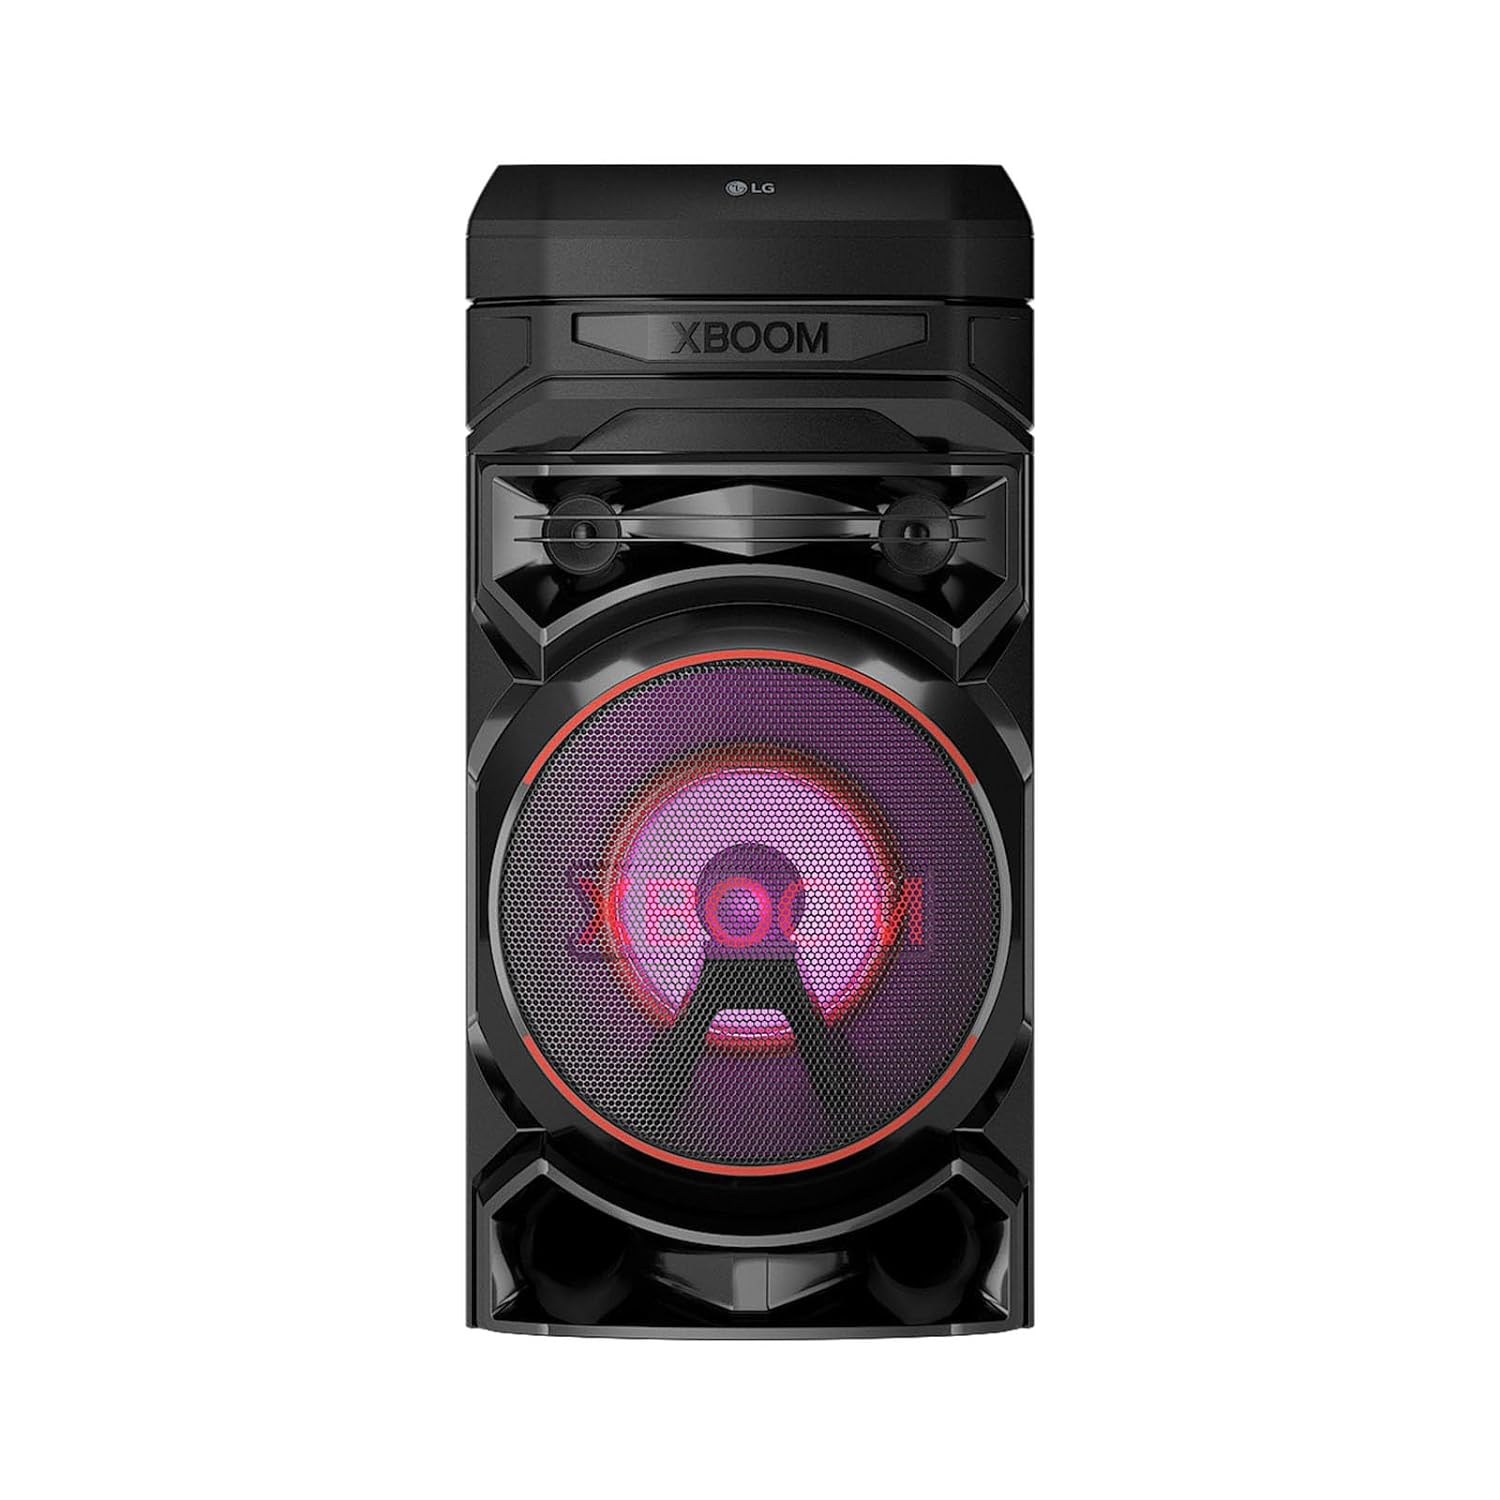 LG XBOOM RNC5 Party Speaker, Karaoke Feature, 1 Wired Mic, Wireless Party, USB, Bluetooth, XBOOM App